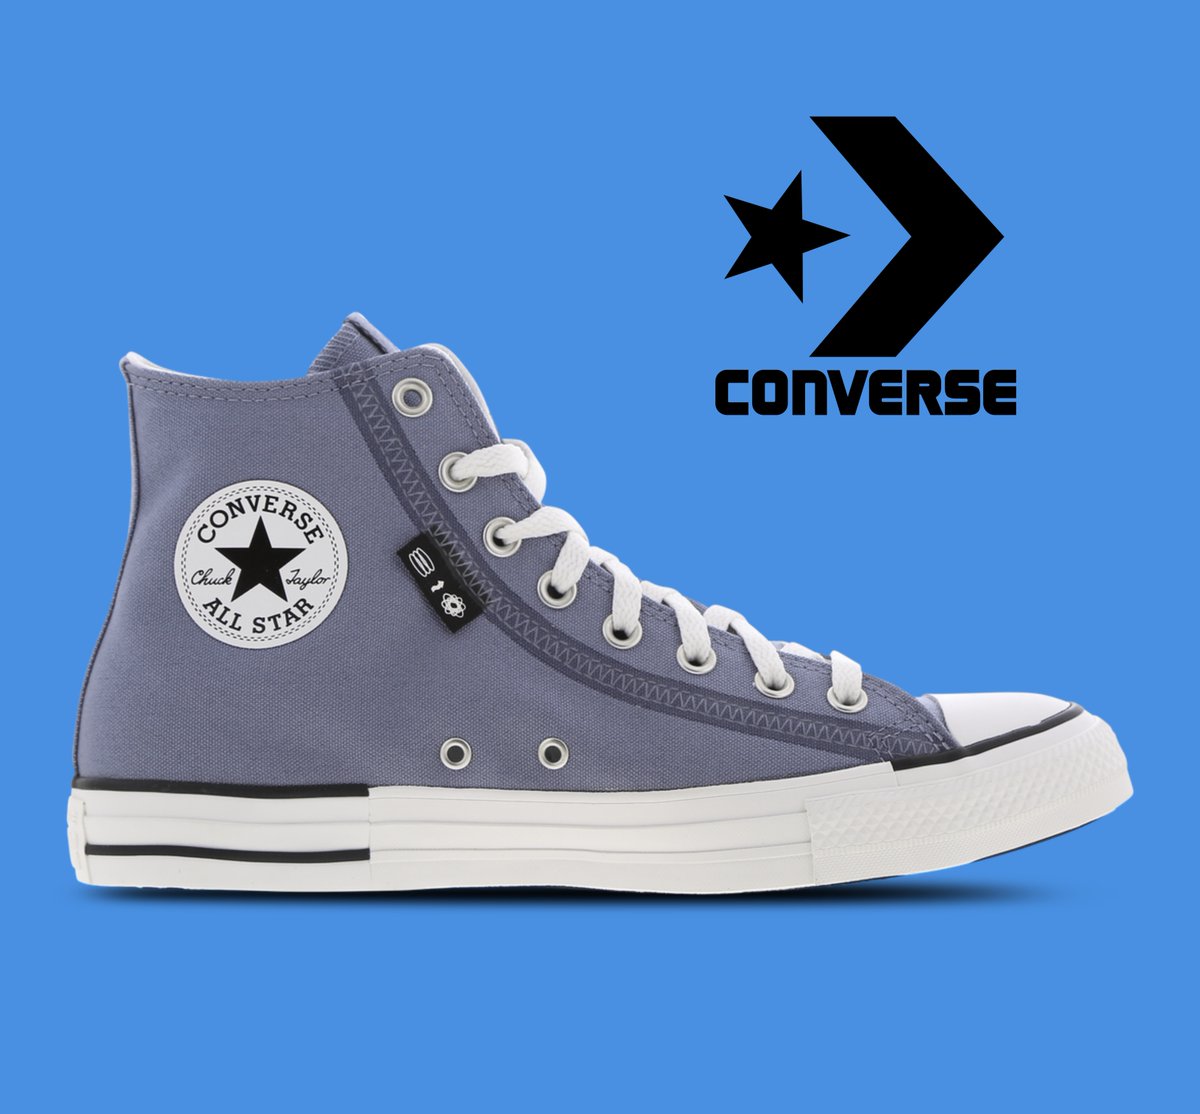 Ad : Convers Hi-Tops under £30 with Free delivery Online here 🔗tidd.ly/3WxERkz * Sizes 7 to 12 - Free delivery when signed in as an FLX member when onsite.